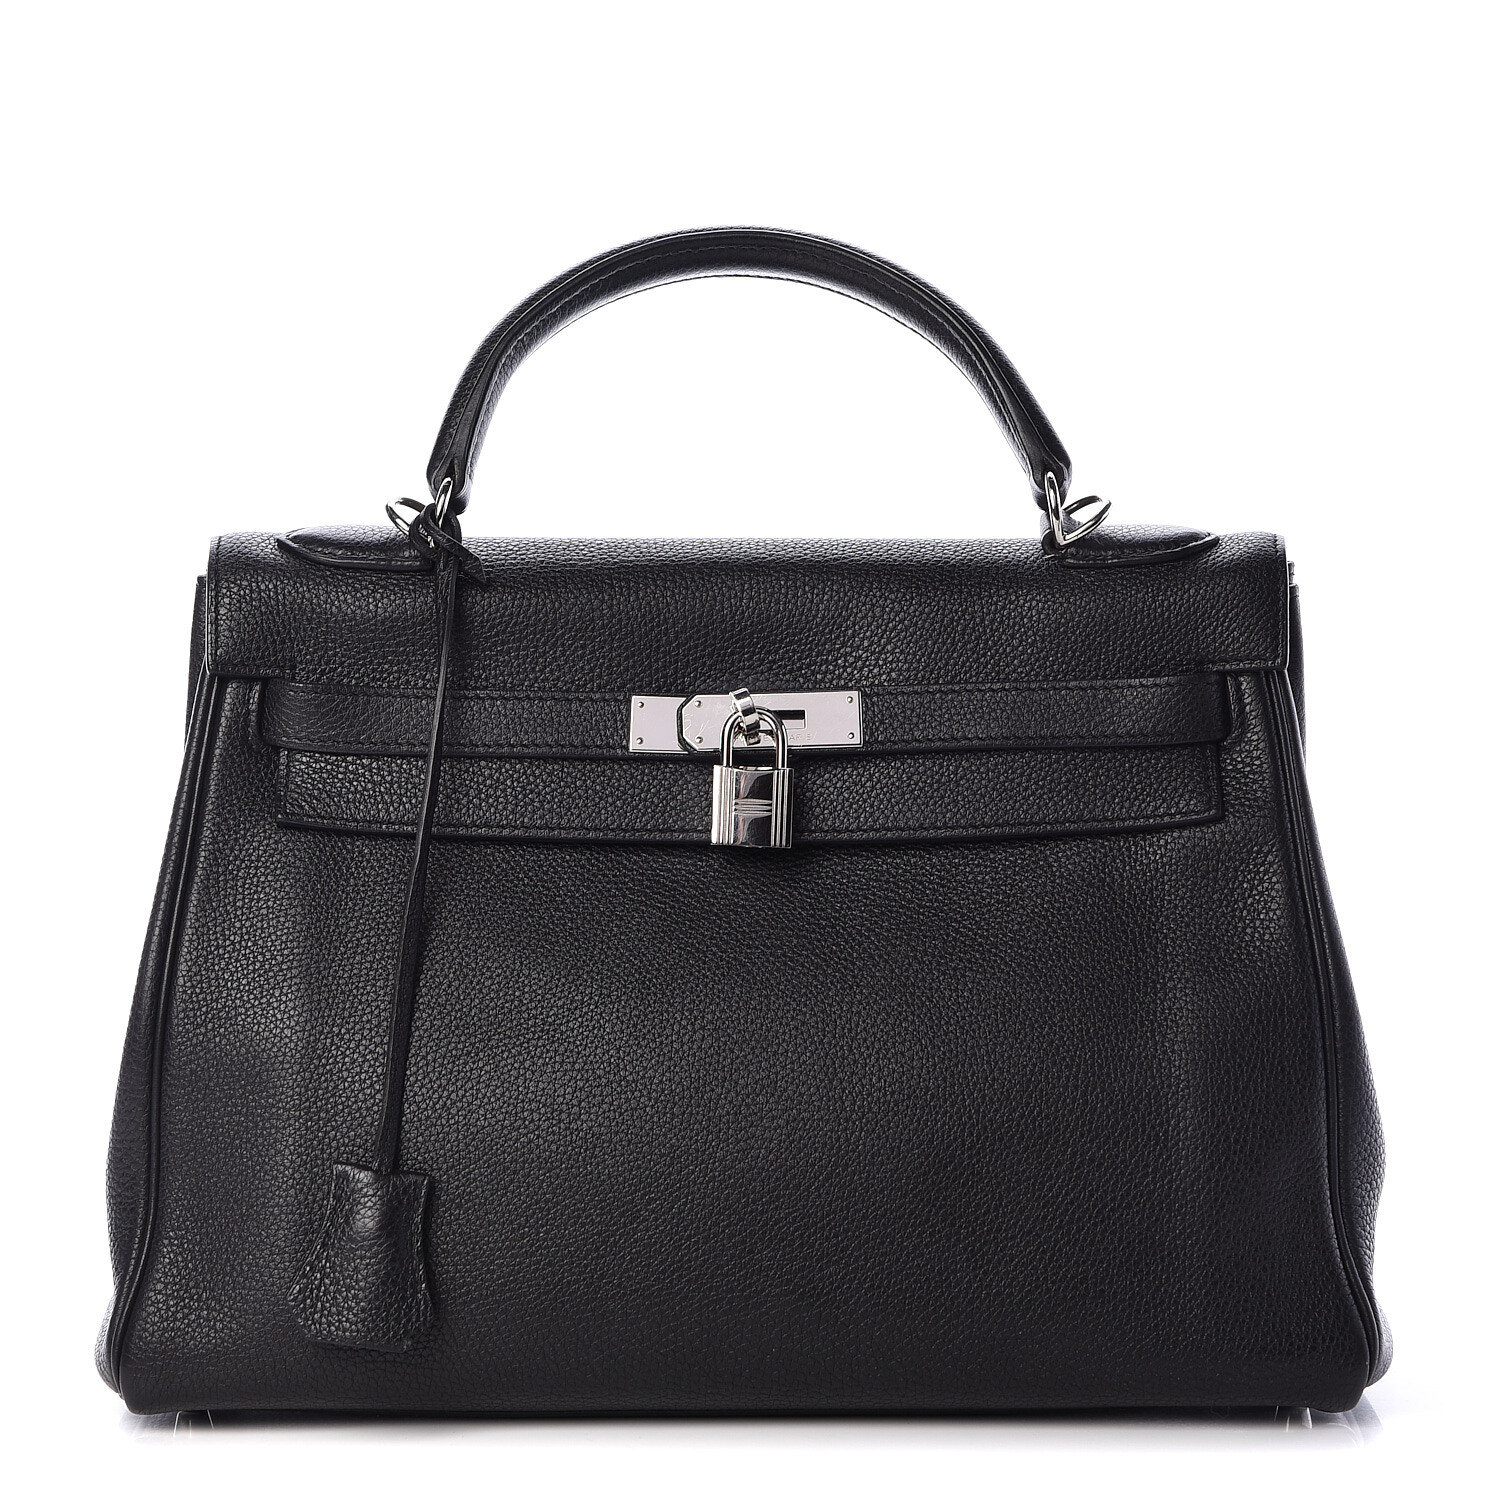 hermes-togo-kelly-retourne-32-black-available-for-sale-collecting-luxury-1.jpg